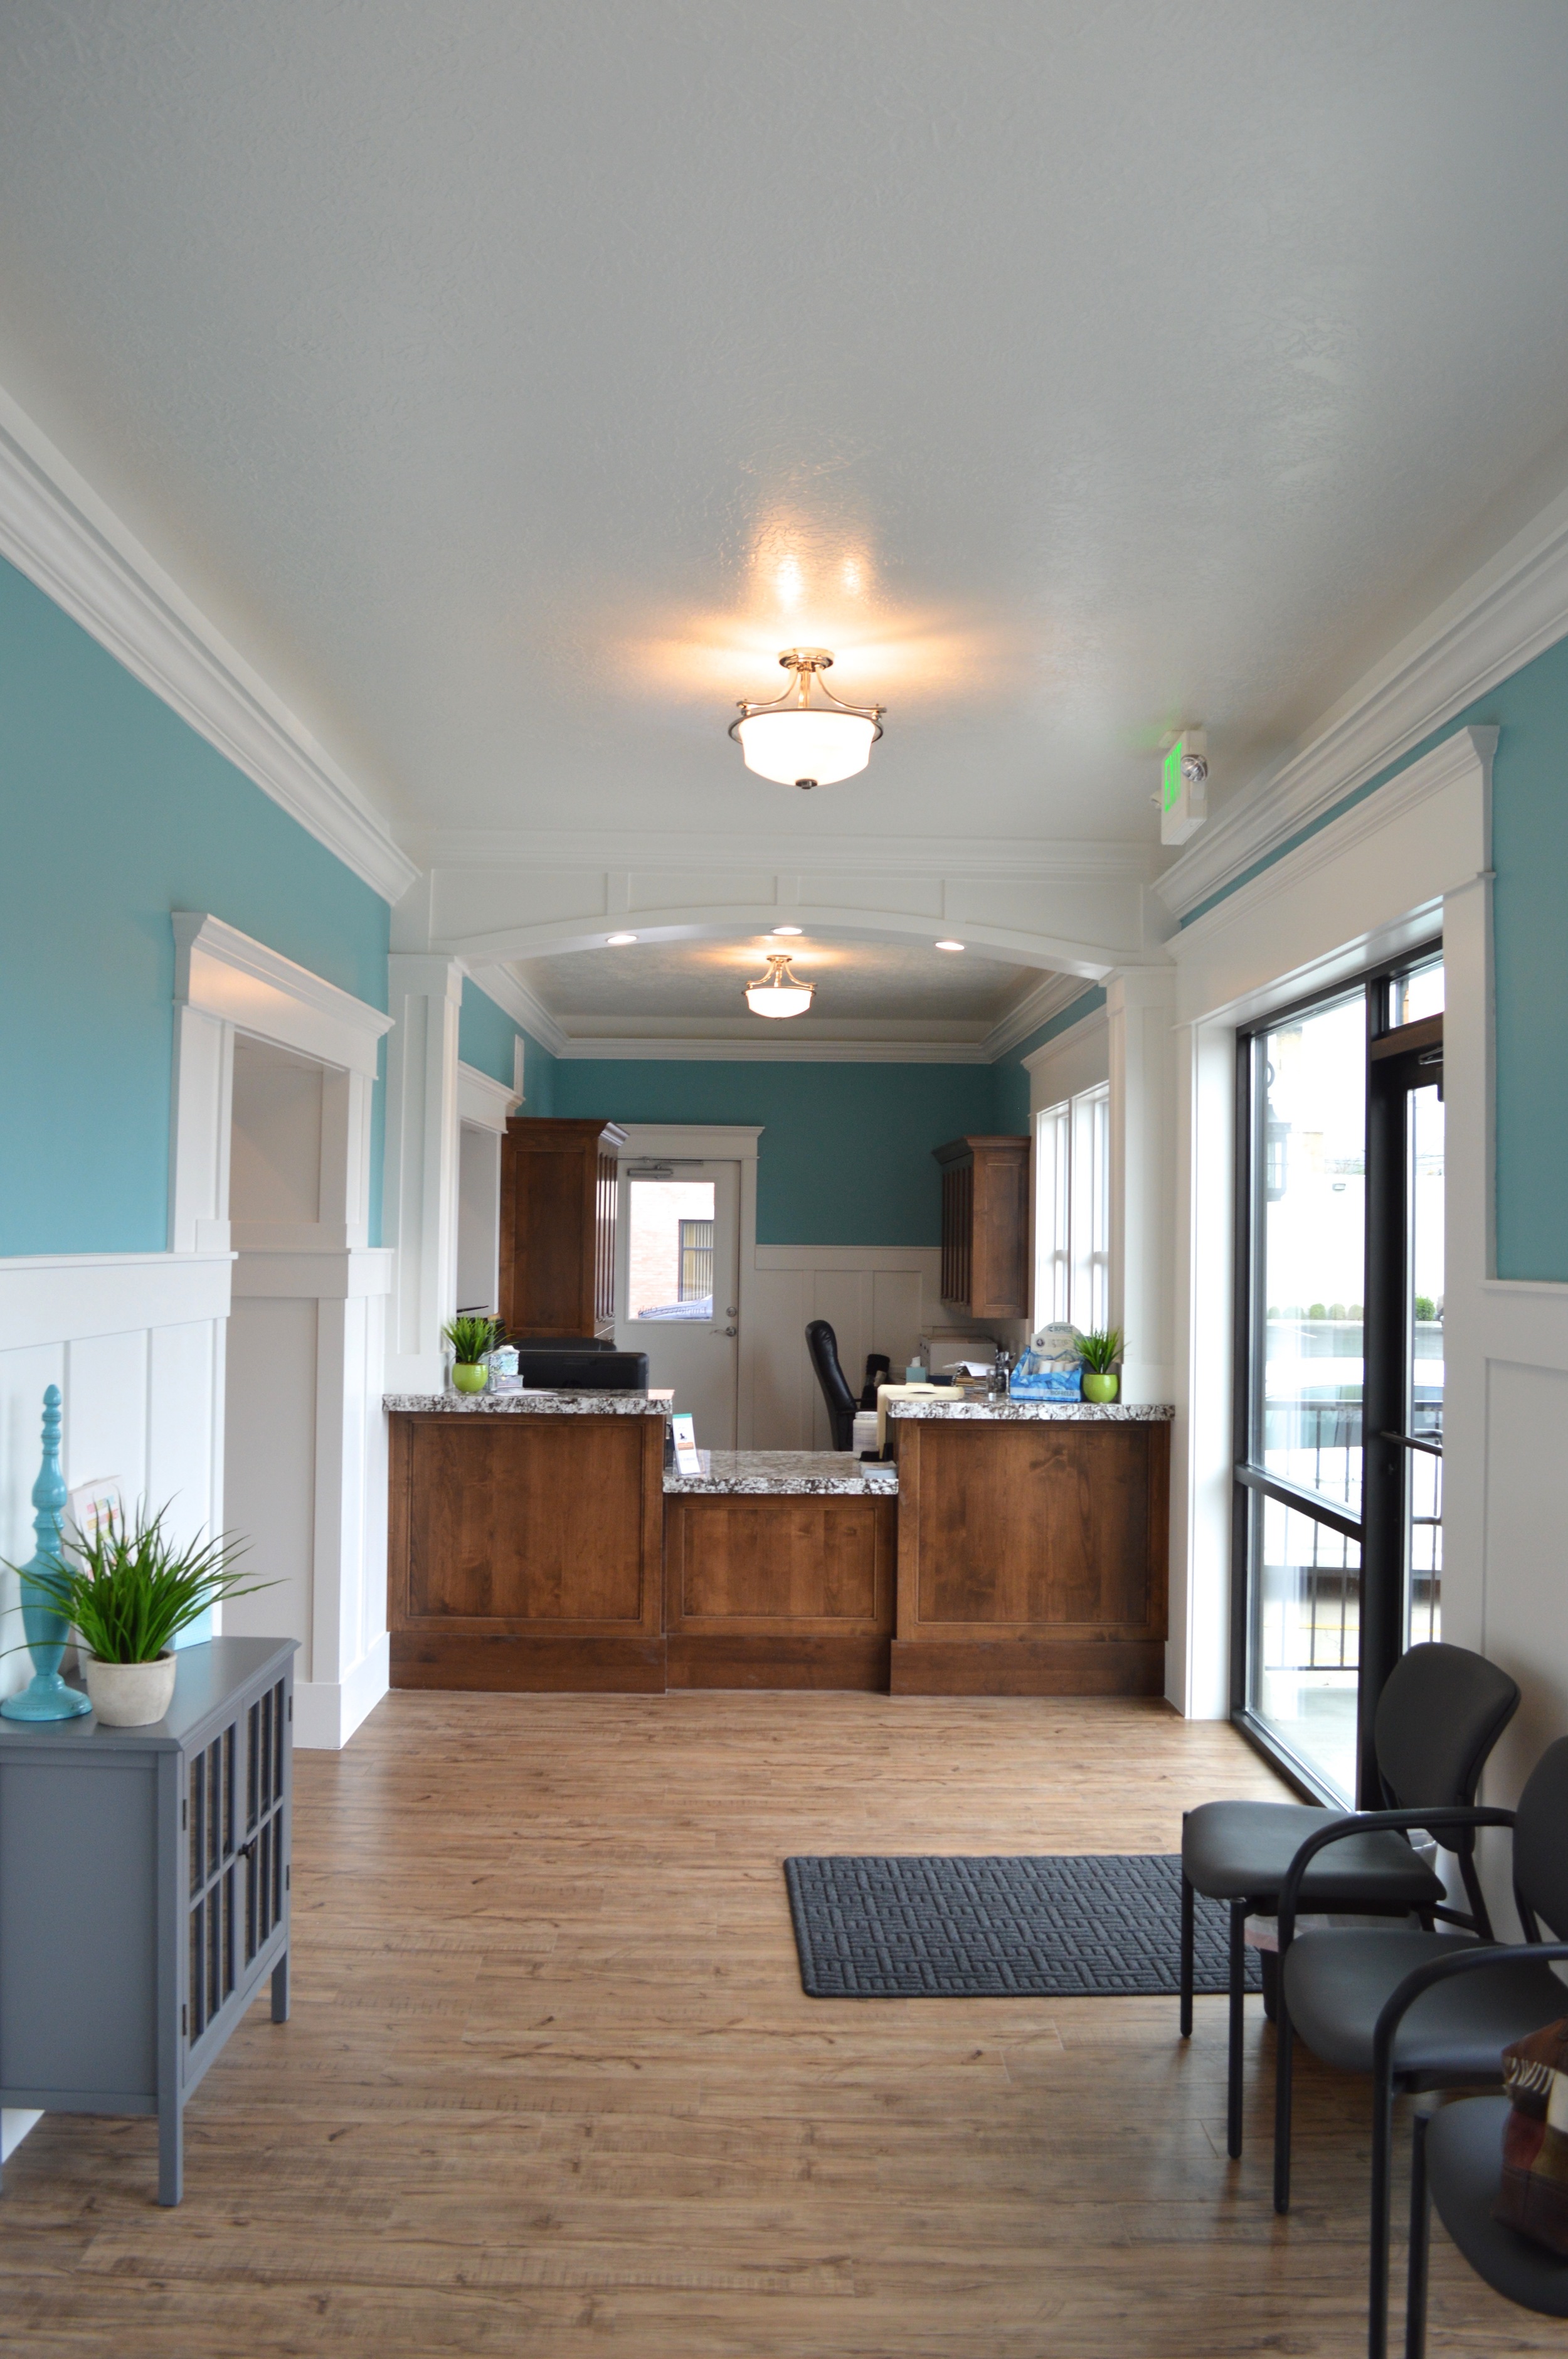 Full Photo Of Advanced Spinal Care Center Front Office And Waiting Area